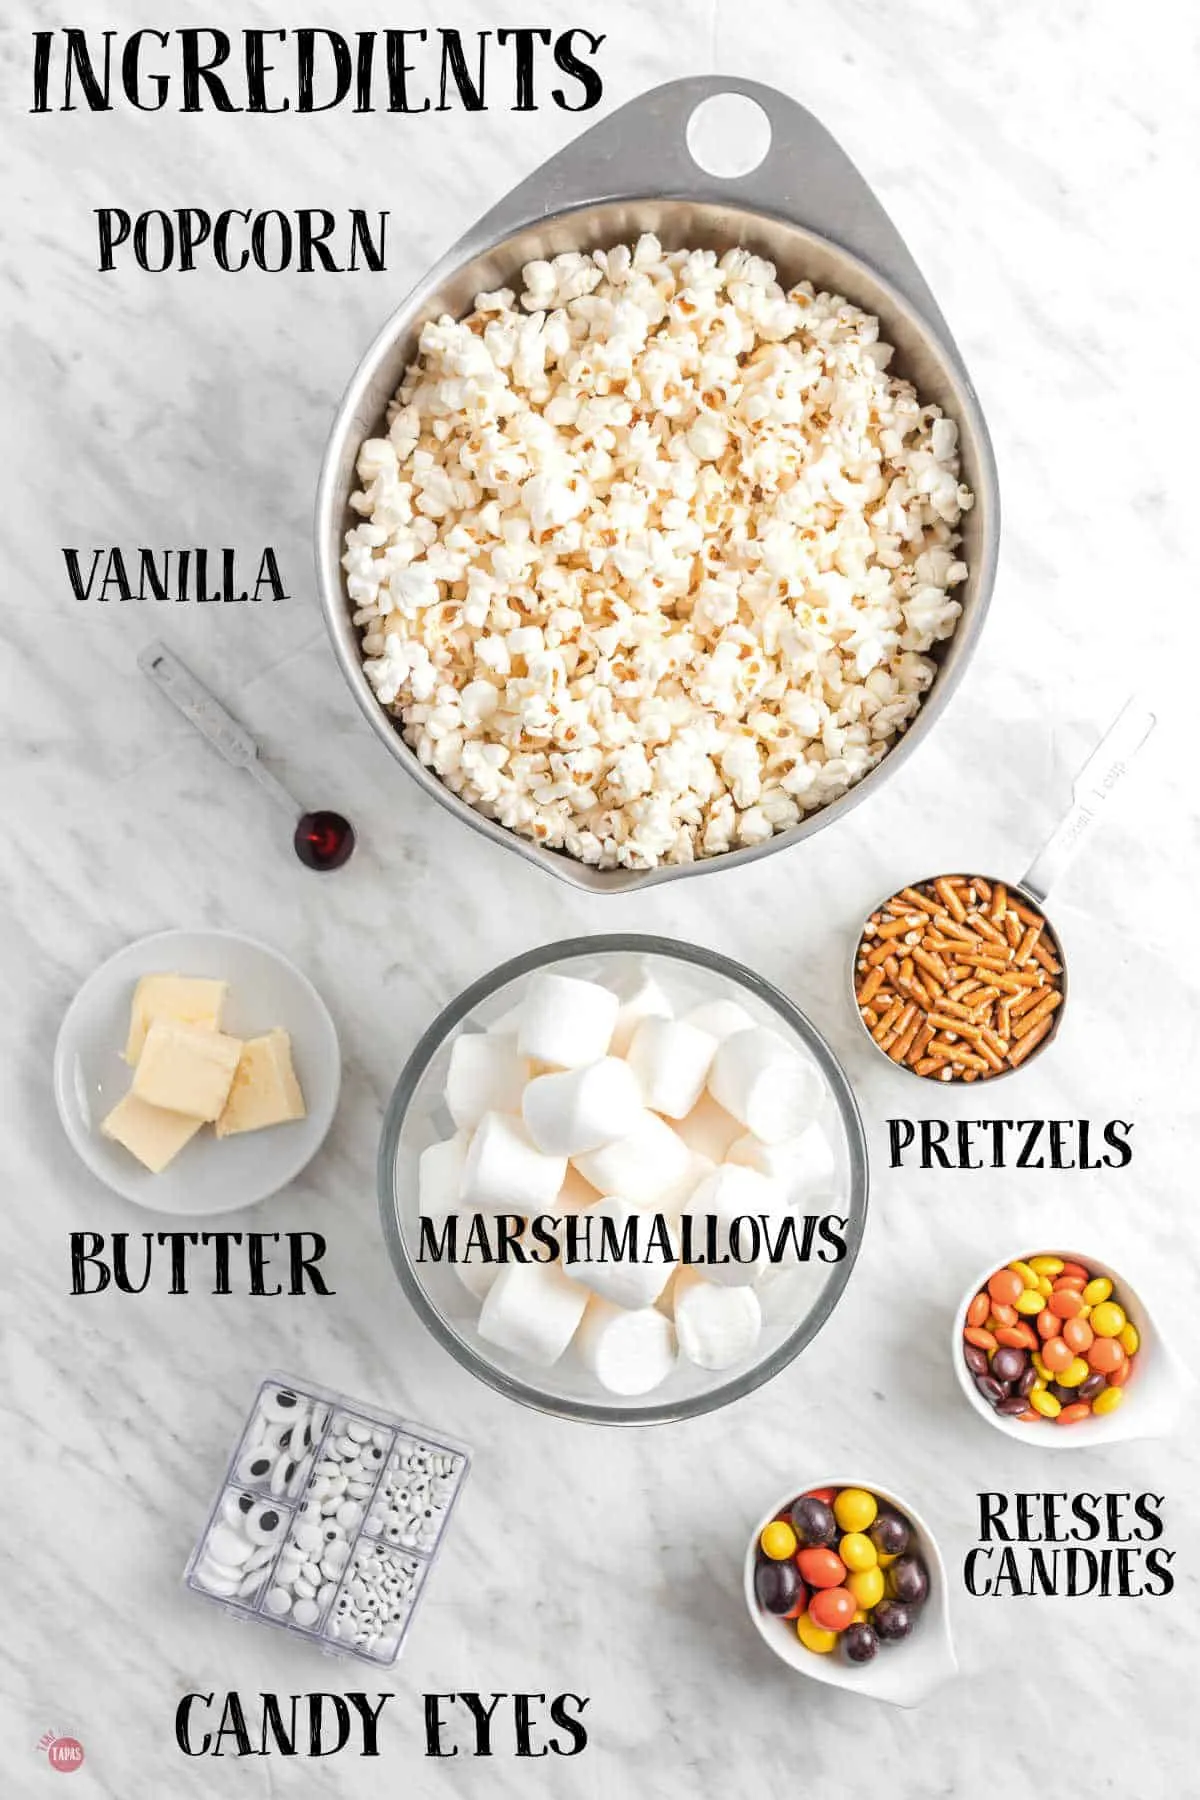 labeled picture of popcorn ball ingredients